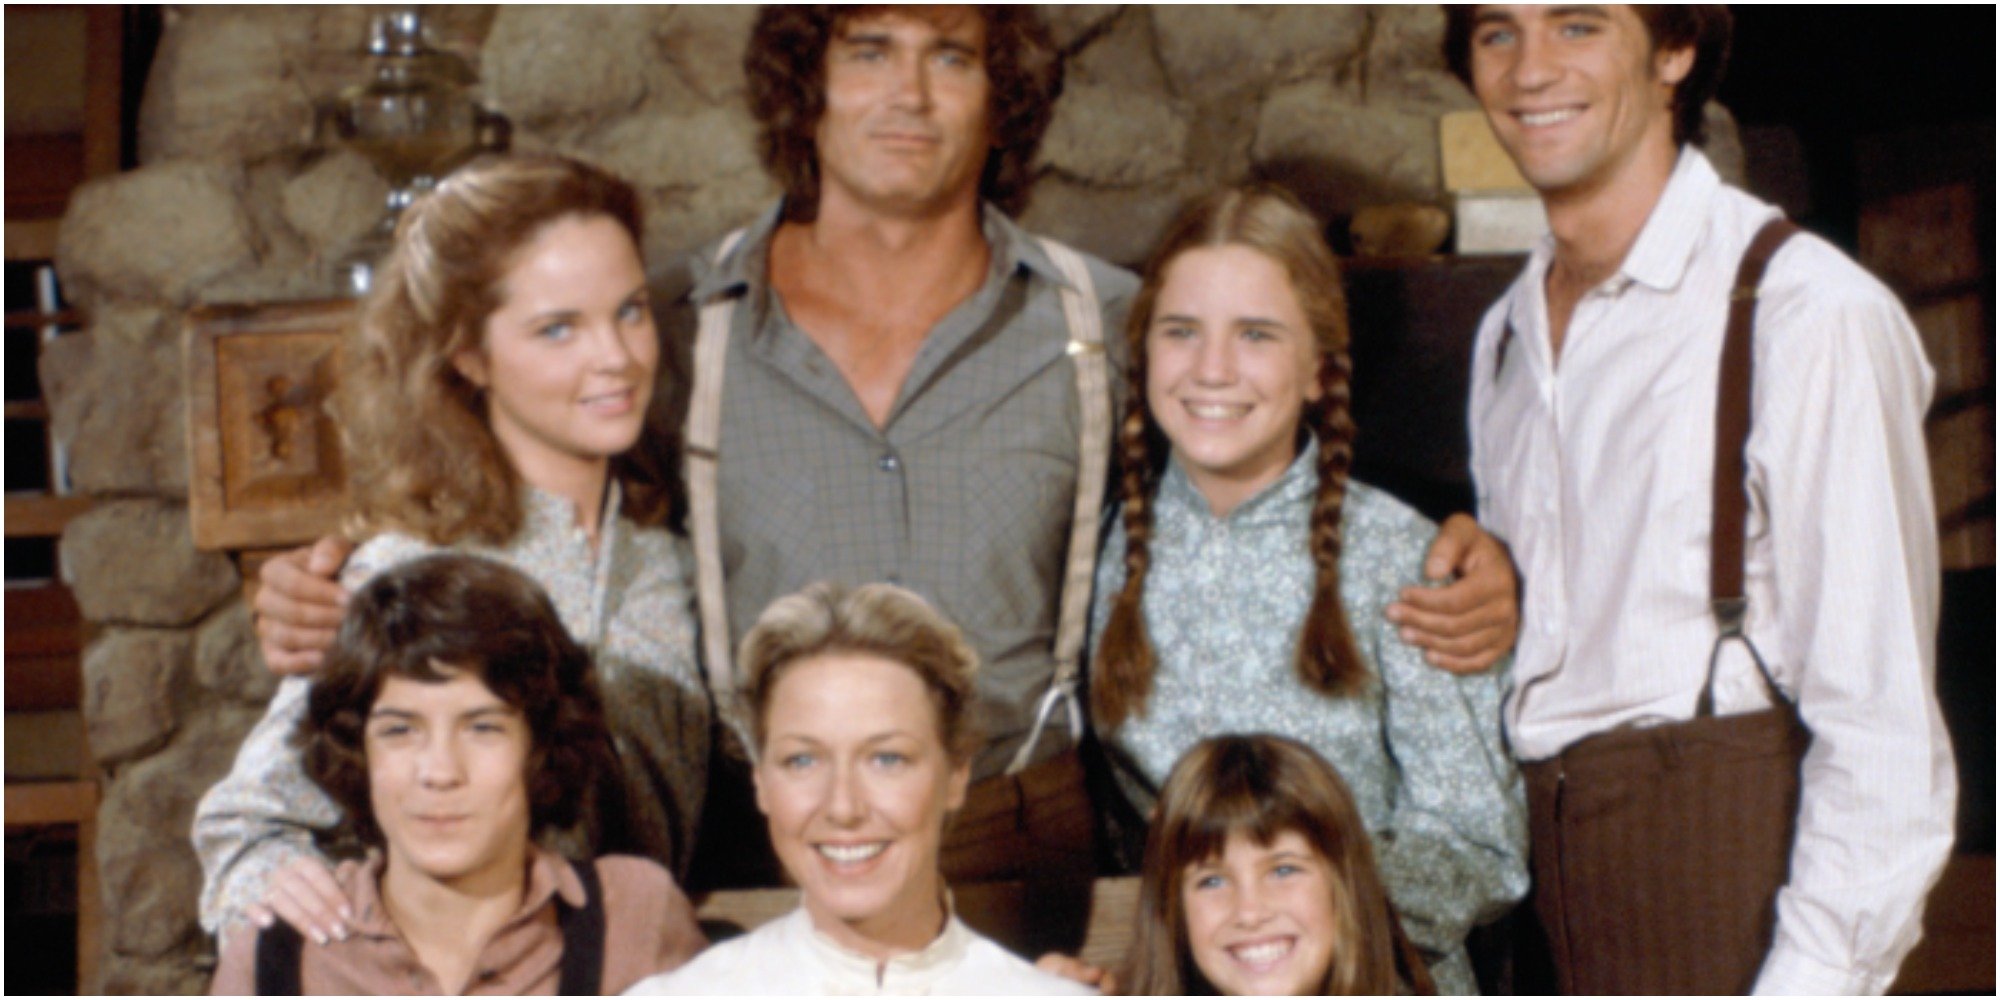 Matthew Labyorteaux and the cast of "Little House on The Prairie" where he was adored by fans as a teen idol.